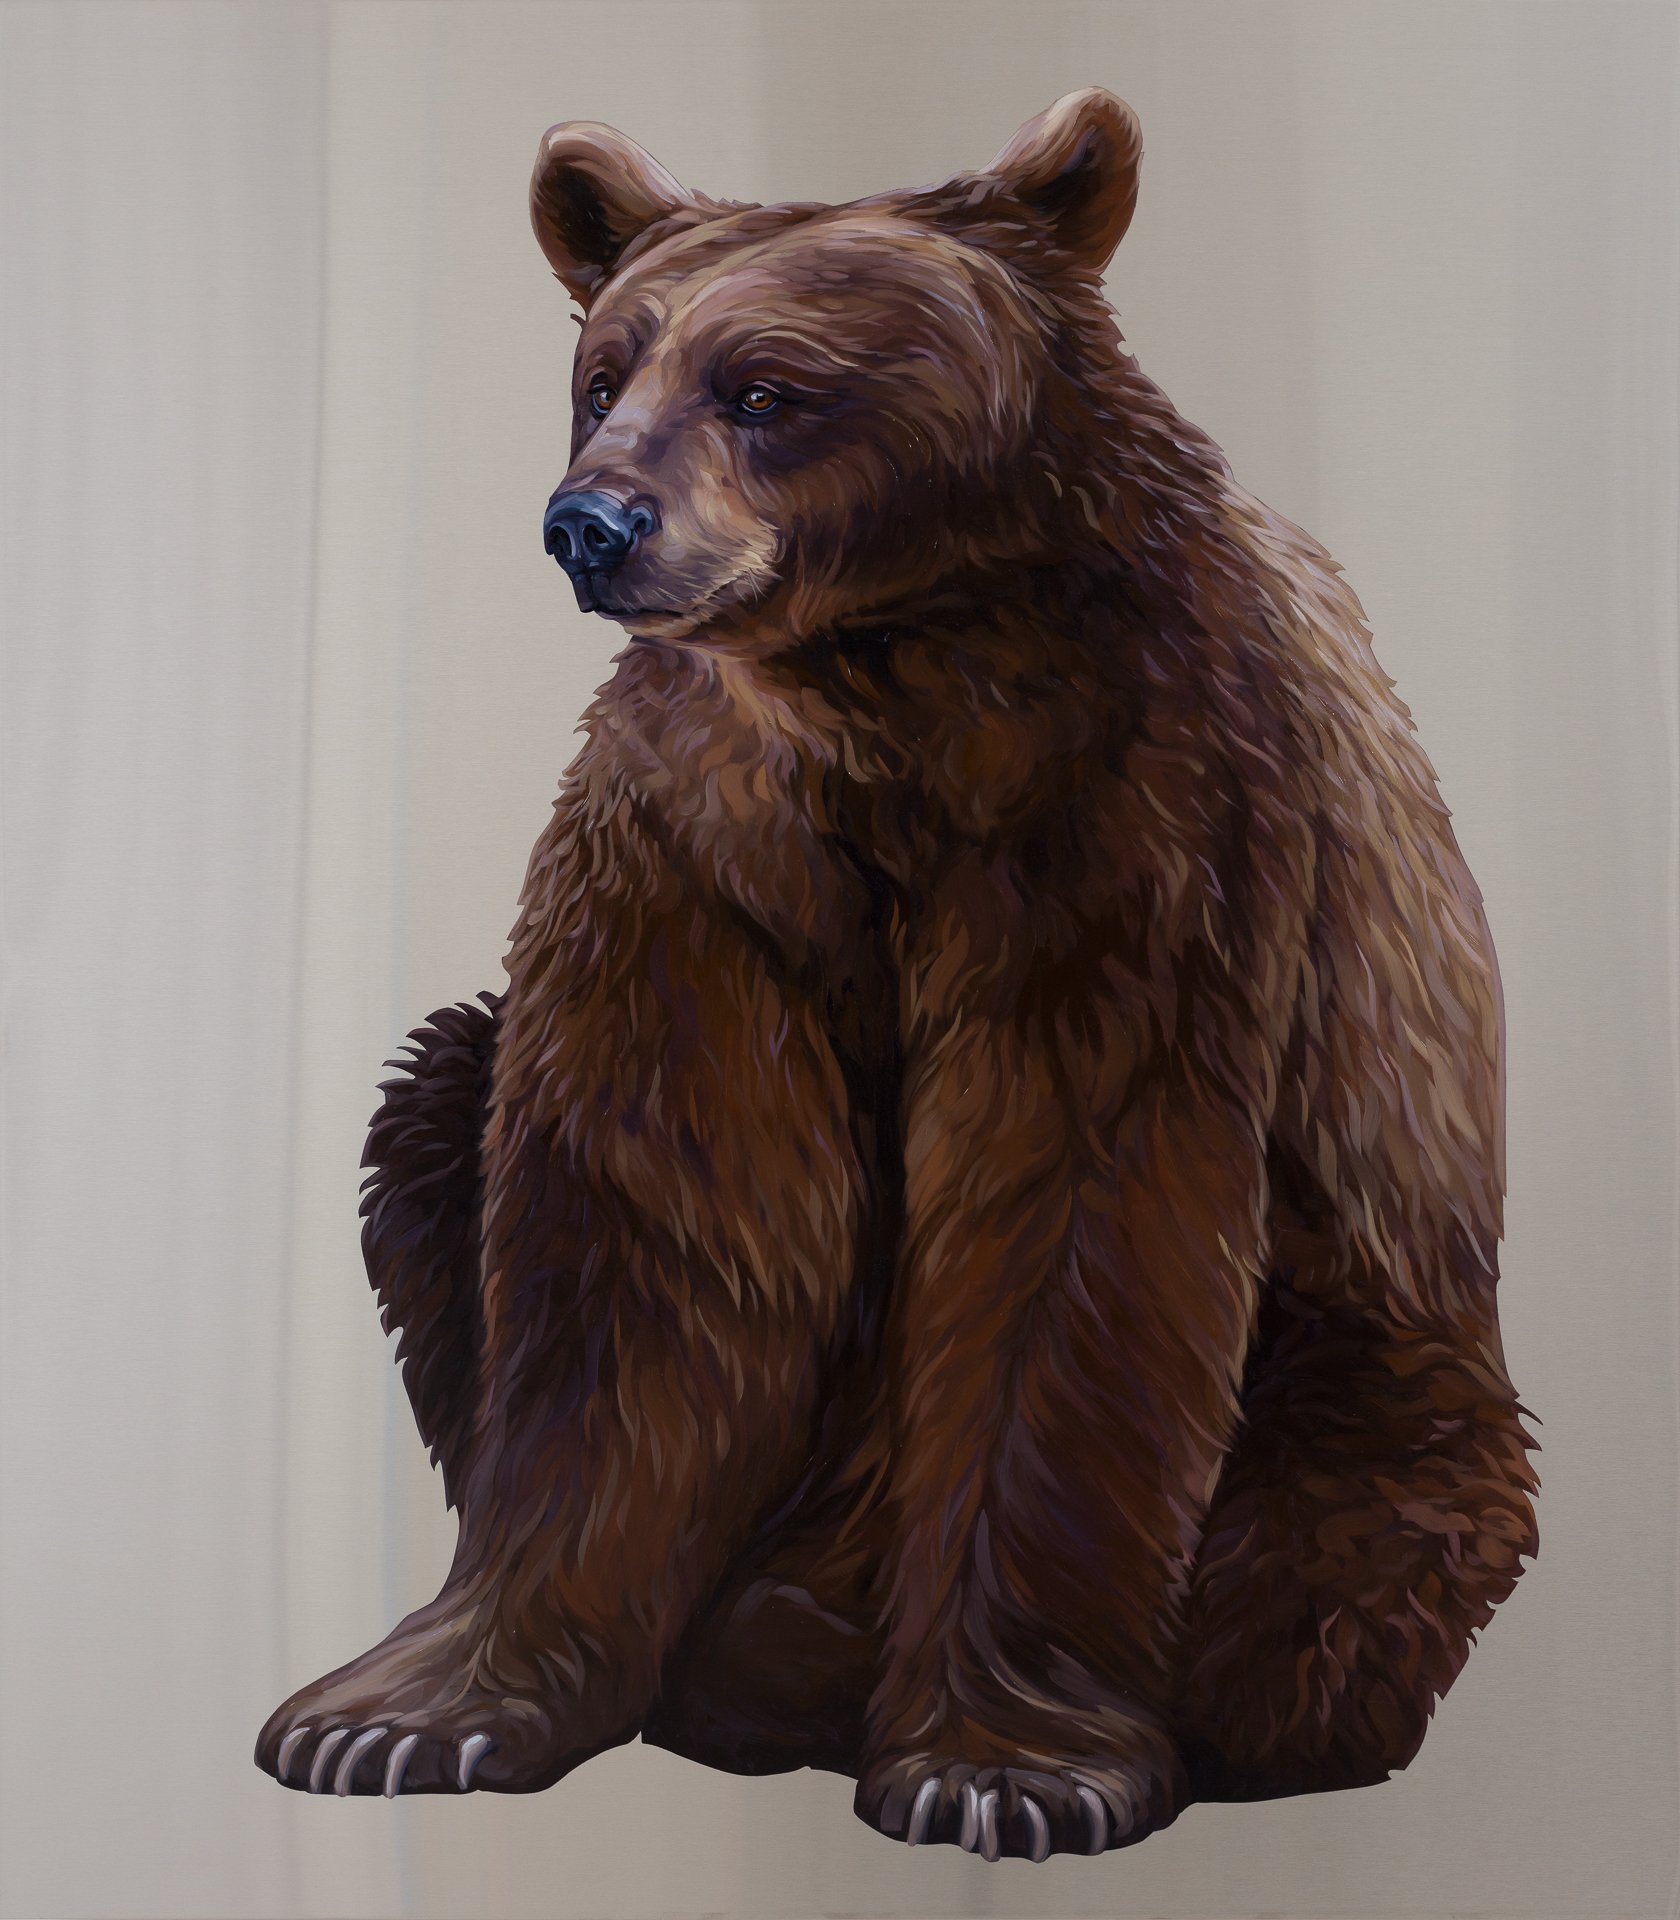  Brown Bear. Oil on stainless steel, 48in x 42in 